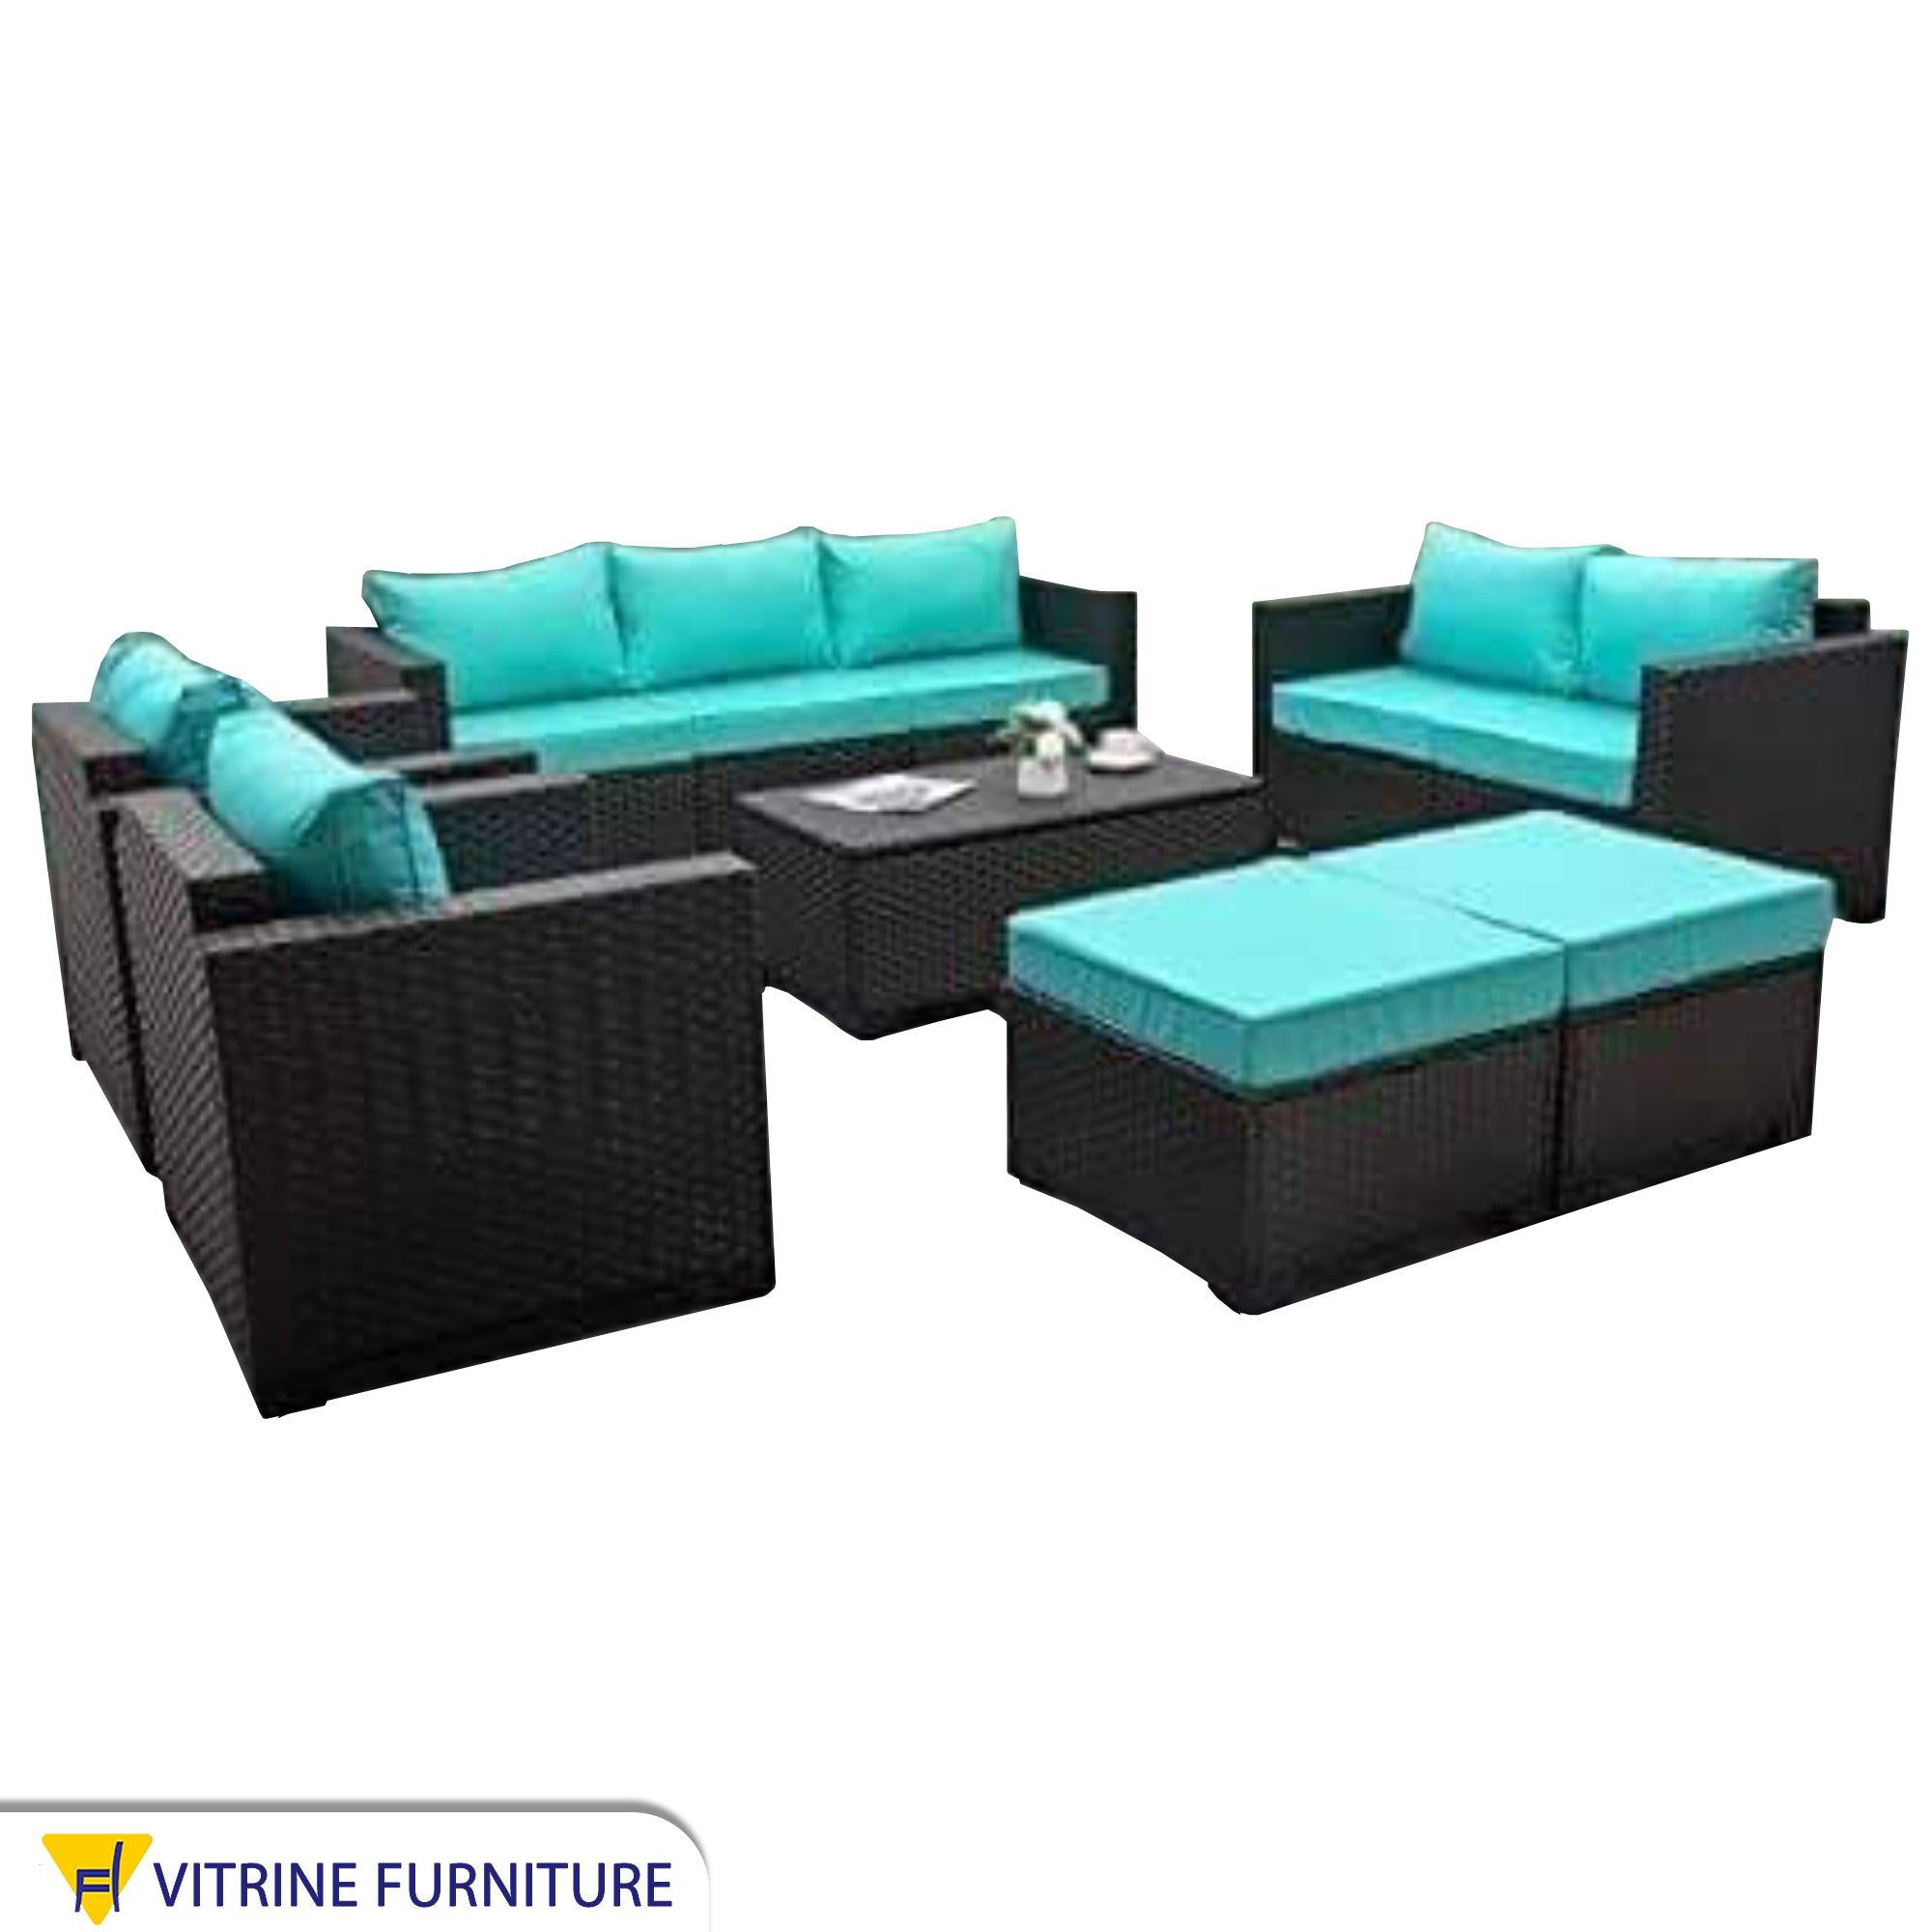 VIP seating set of sofas and chairs